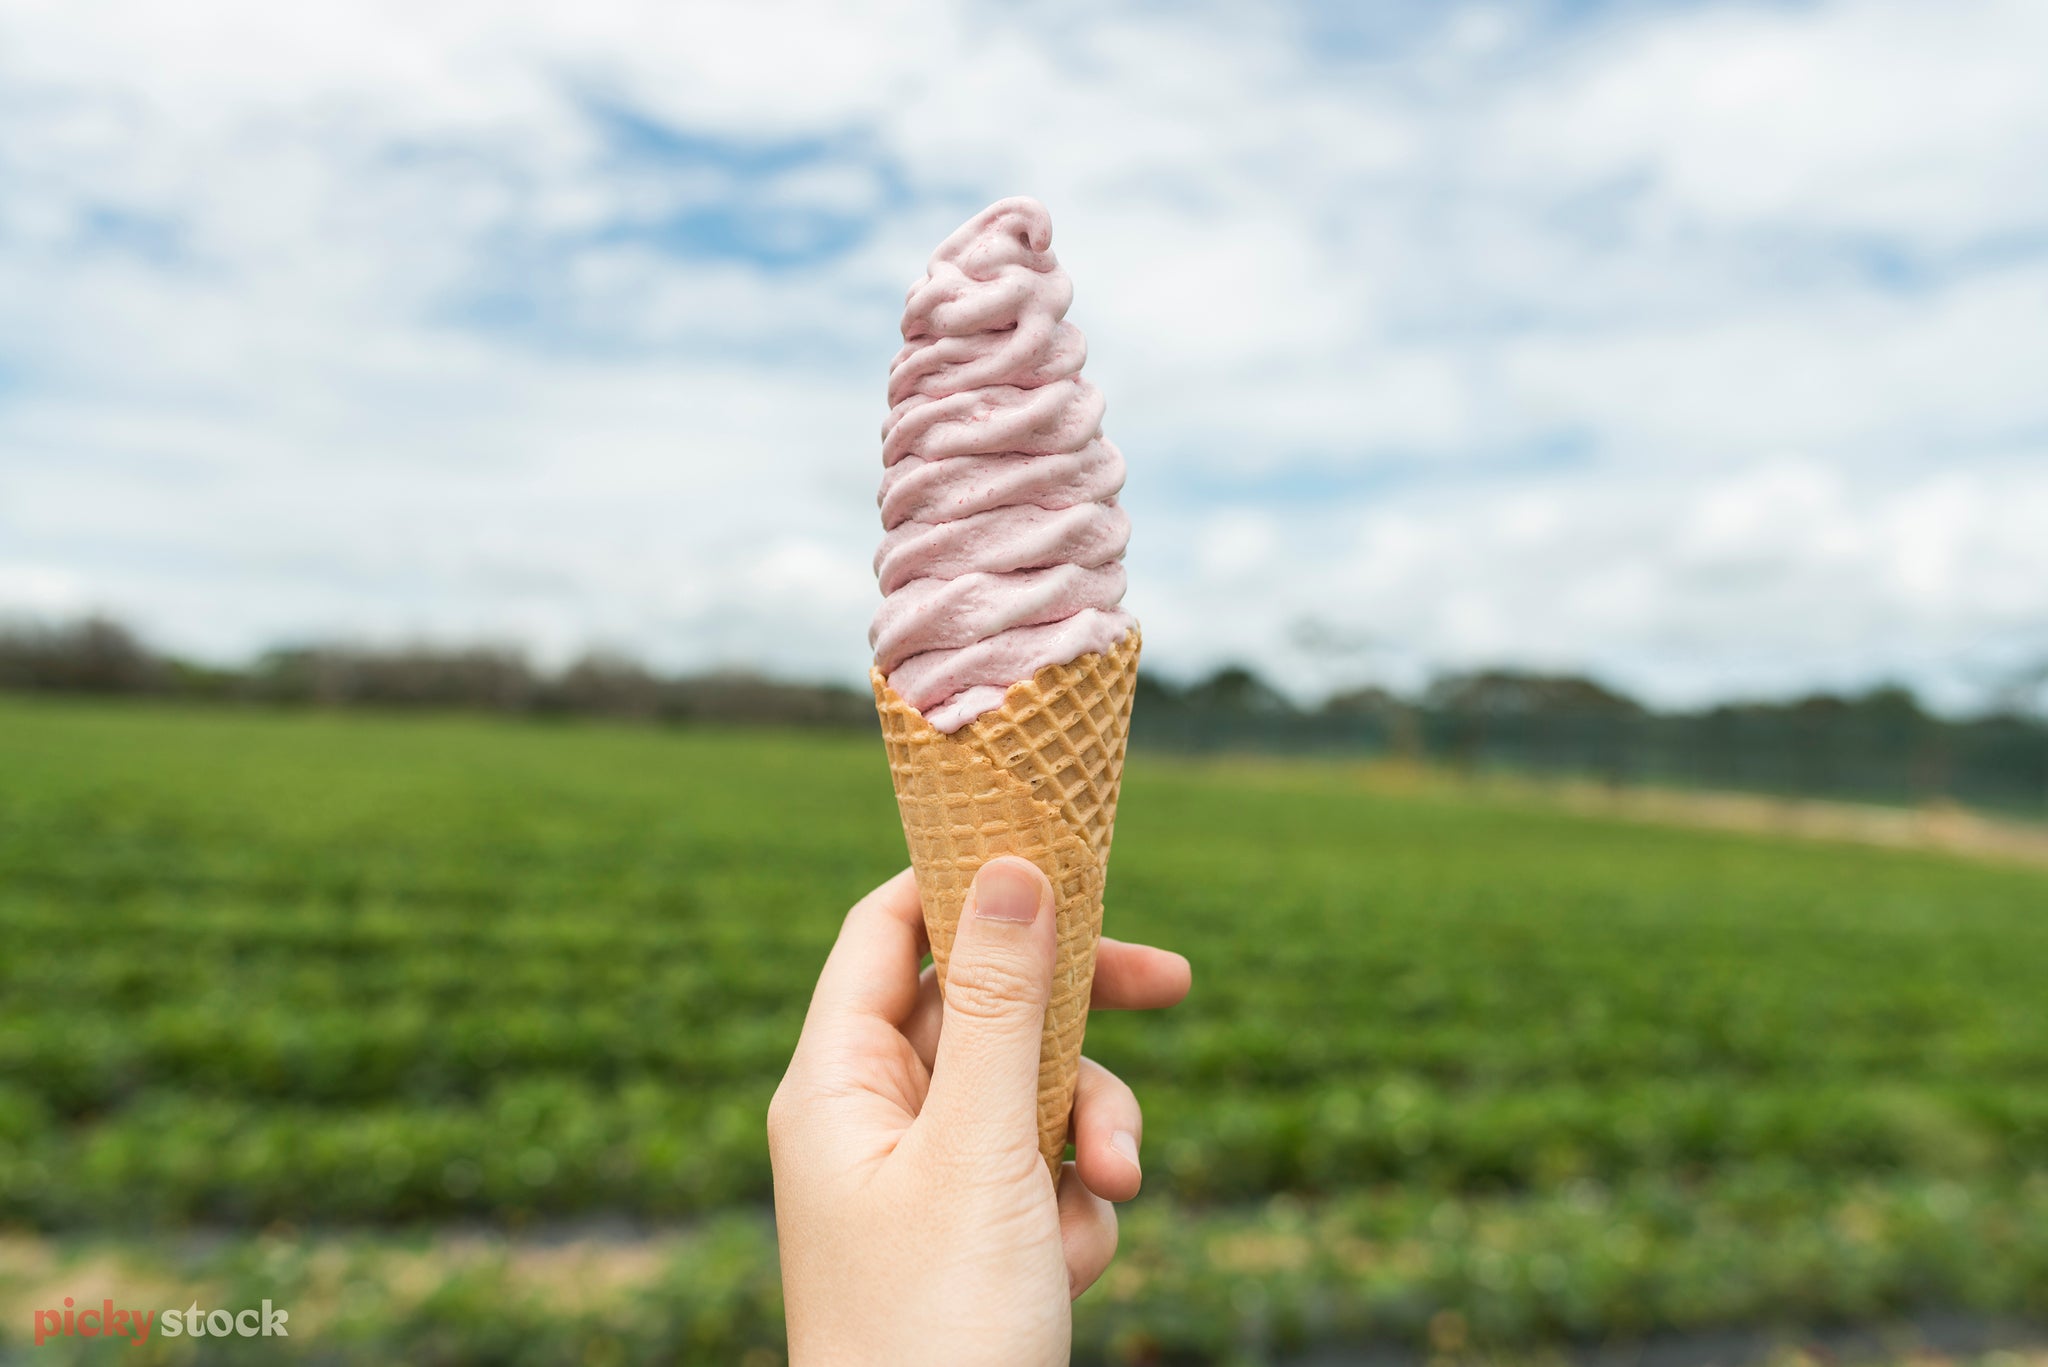 A hand holds up a waffle cone real fruit icecream in front of out of focus green fields.